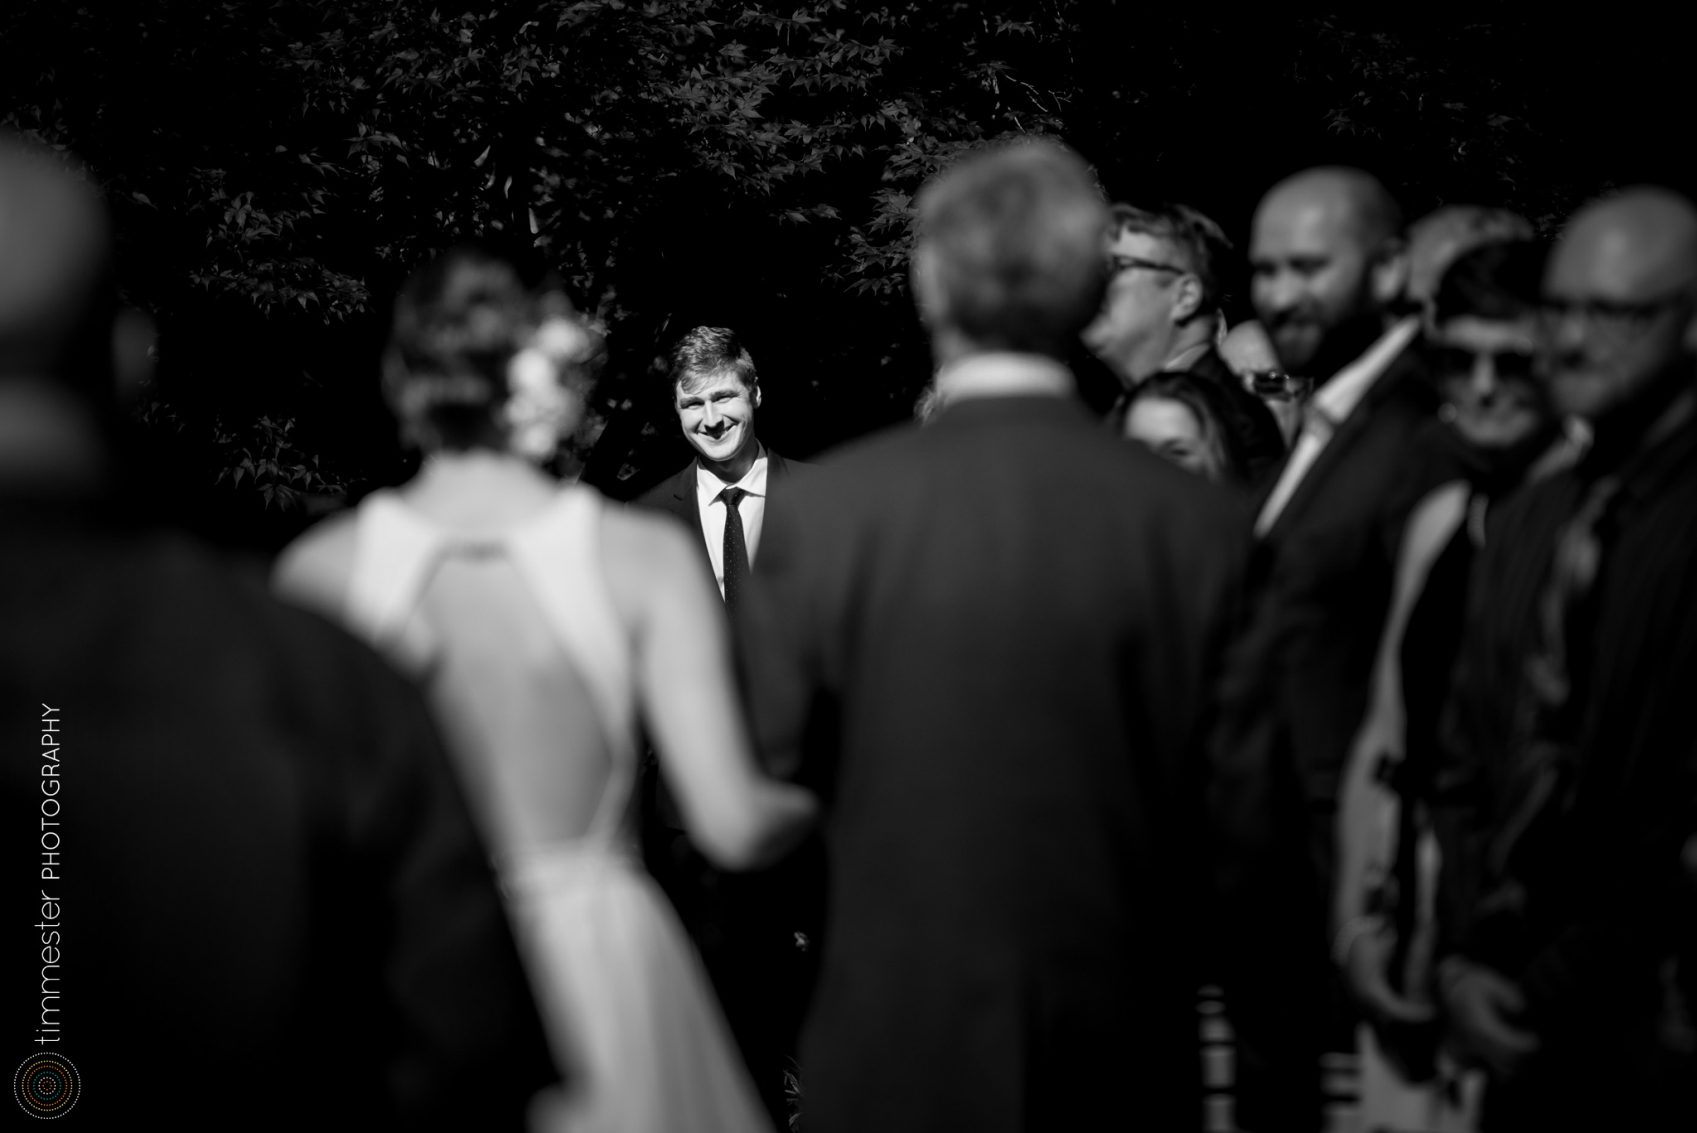 The bride's processional during an outdoor garden ceremony in Raleigh, NC at Fred Fletcher Park.